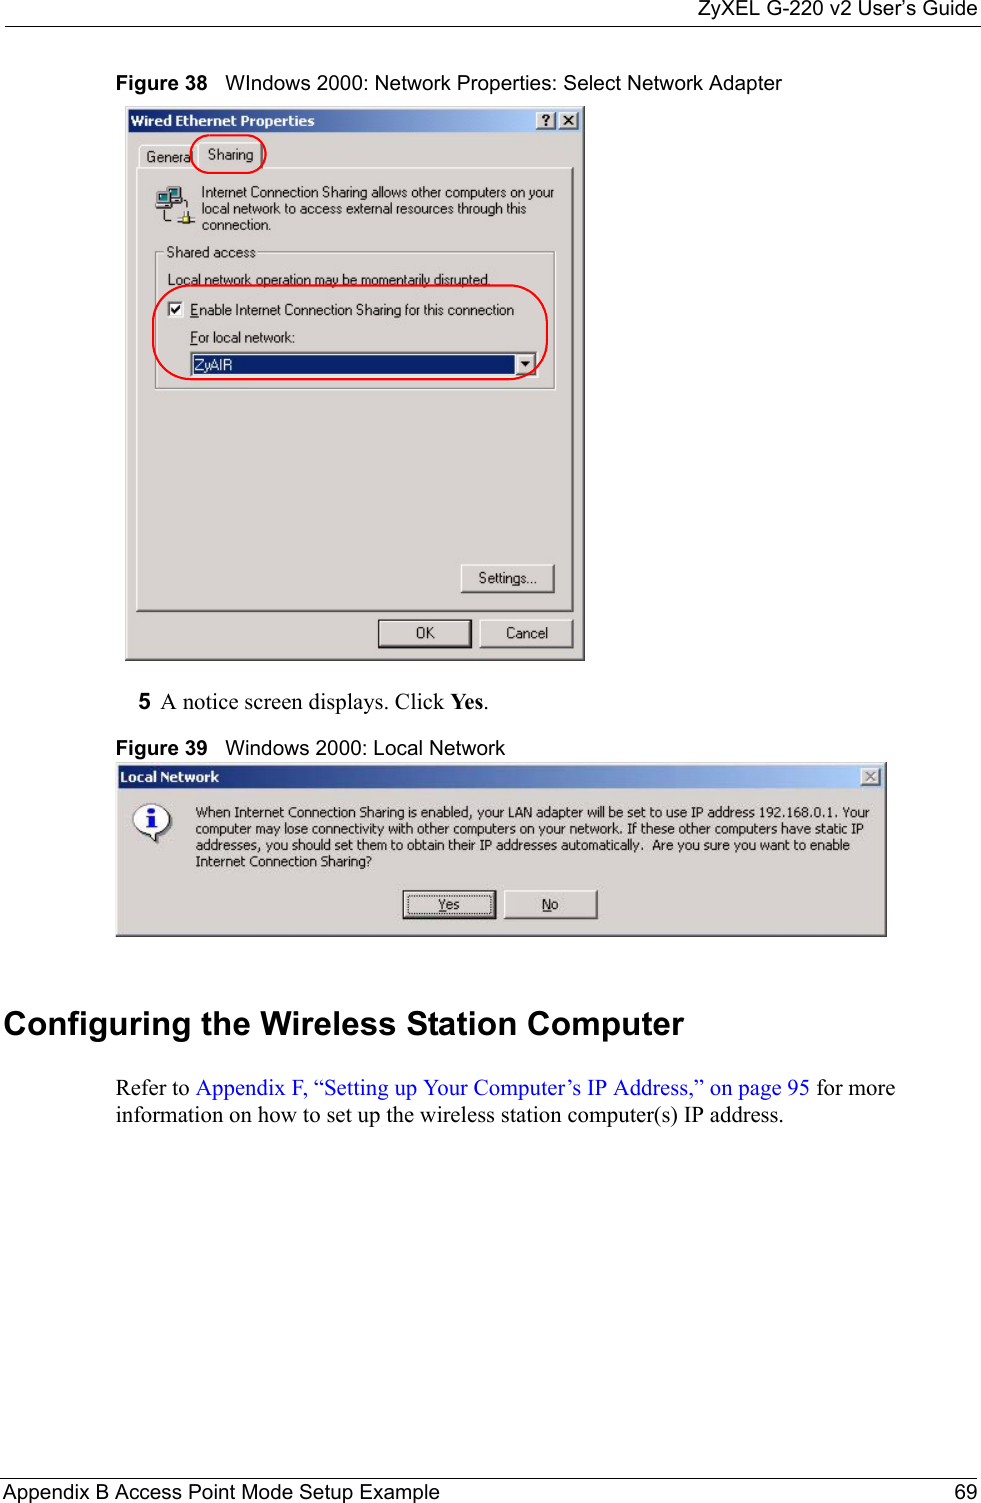 ZyXEL G-220 v2 User’s GuideAppendix B Access Point Mode Setup Example 69Figure 38   WIndows 2000: Network Properties: Select Network Adapter 5A notice screen displays. Click Ye s . Figure 39   Windows 2000: Local Network Configuring the Wireless Station ComputerRefer to Appendix F, “Setting up Your Computer’s IP Address,” on page 95 for more information on how to set up the wireless station computer(s) IP address.